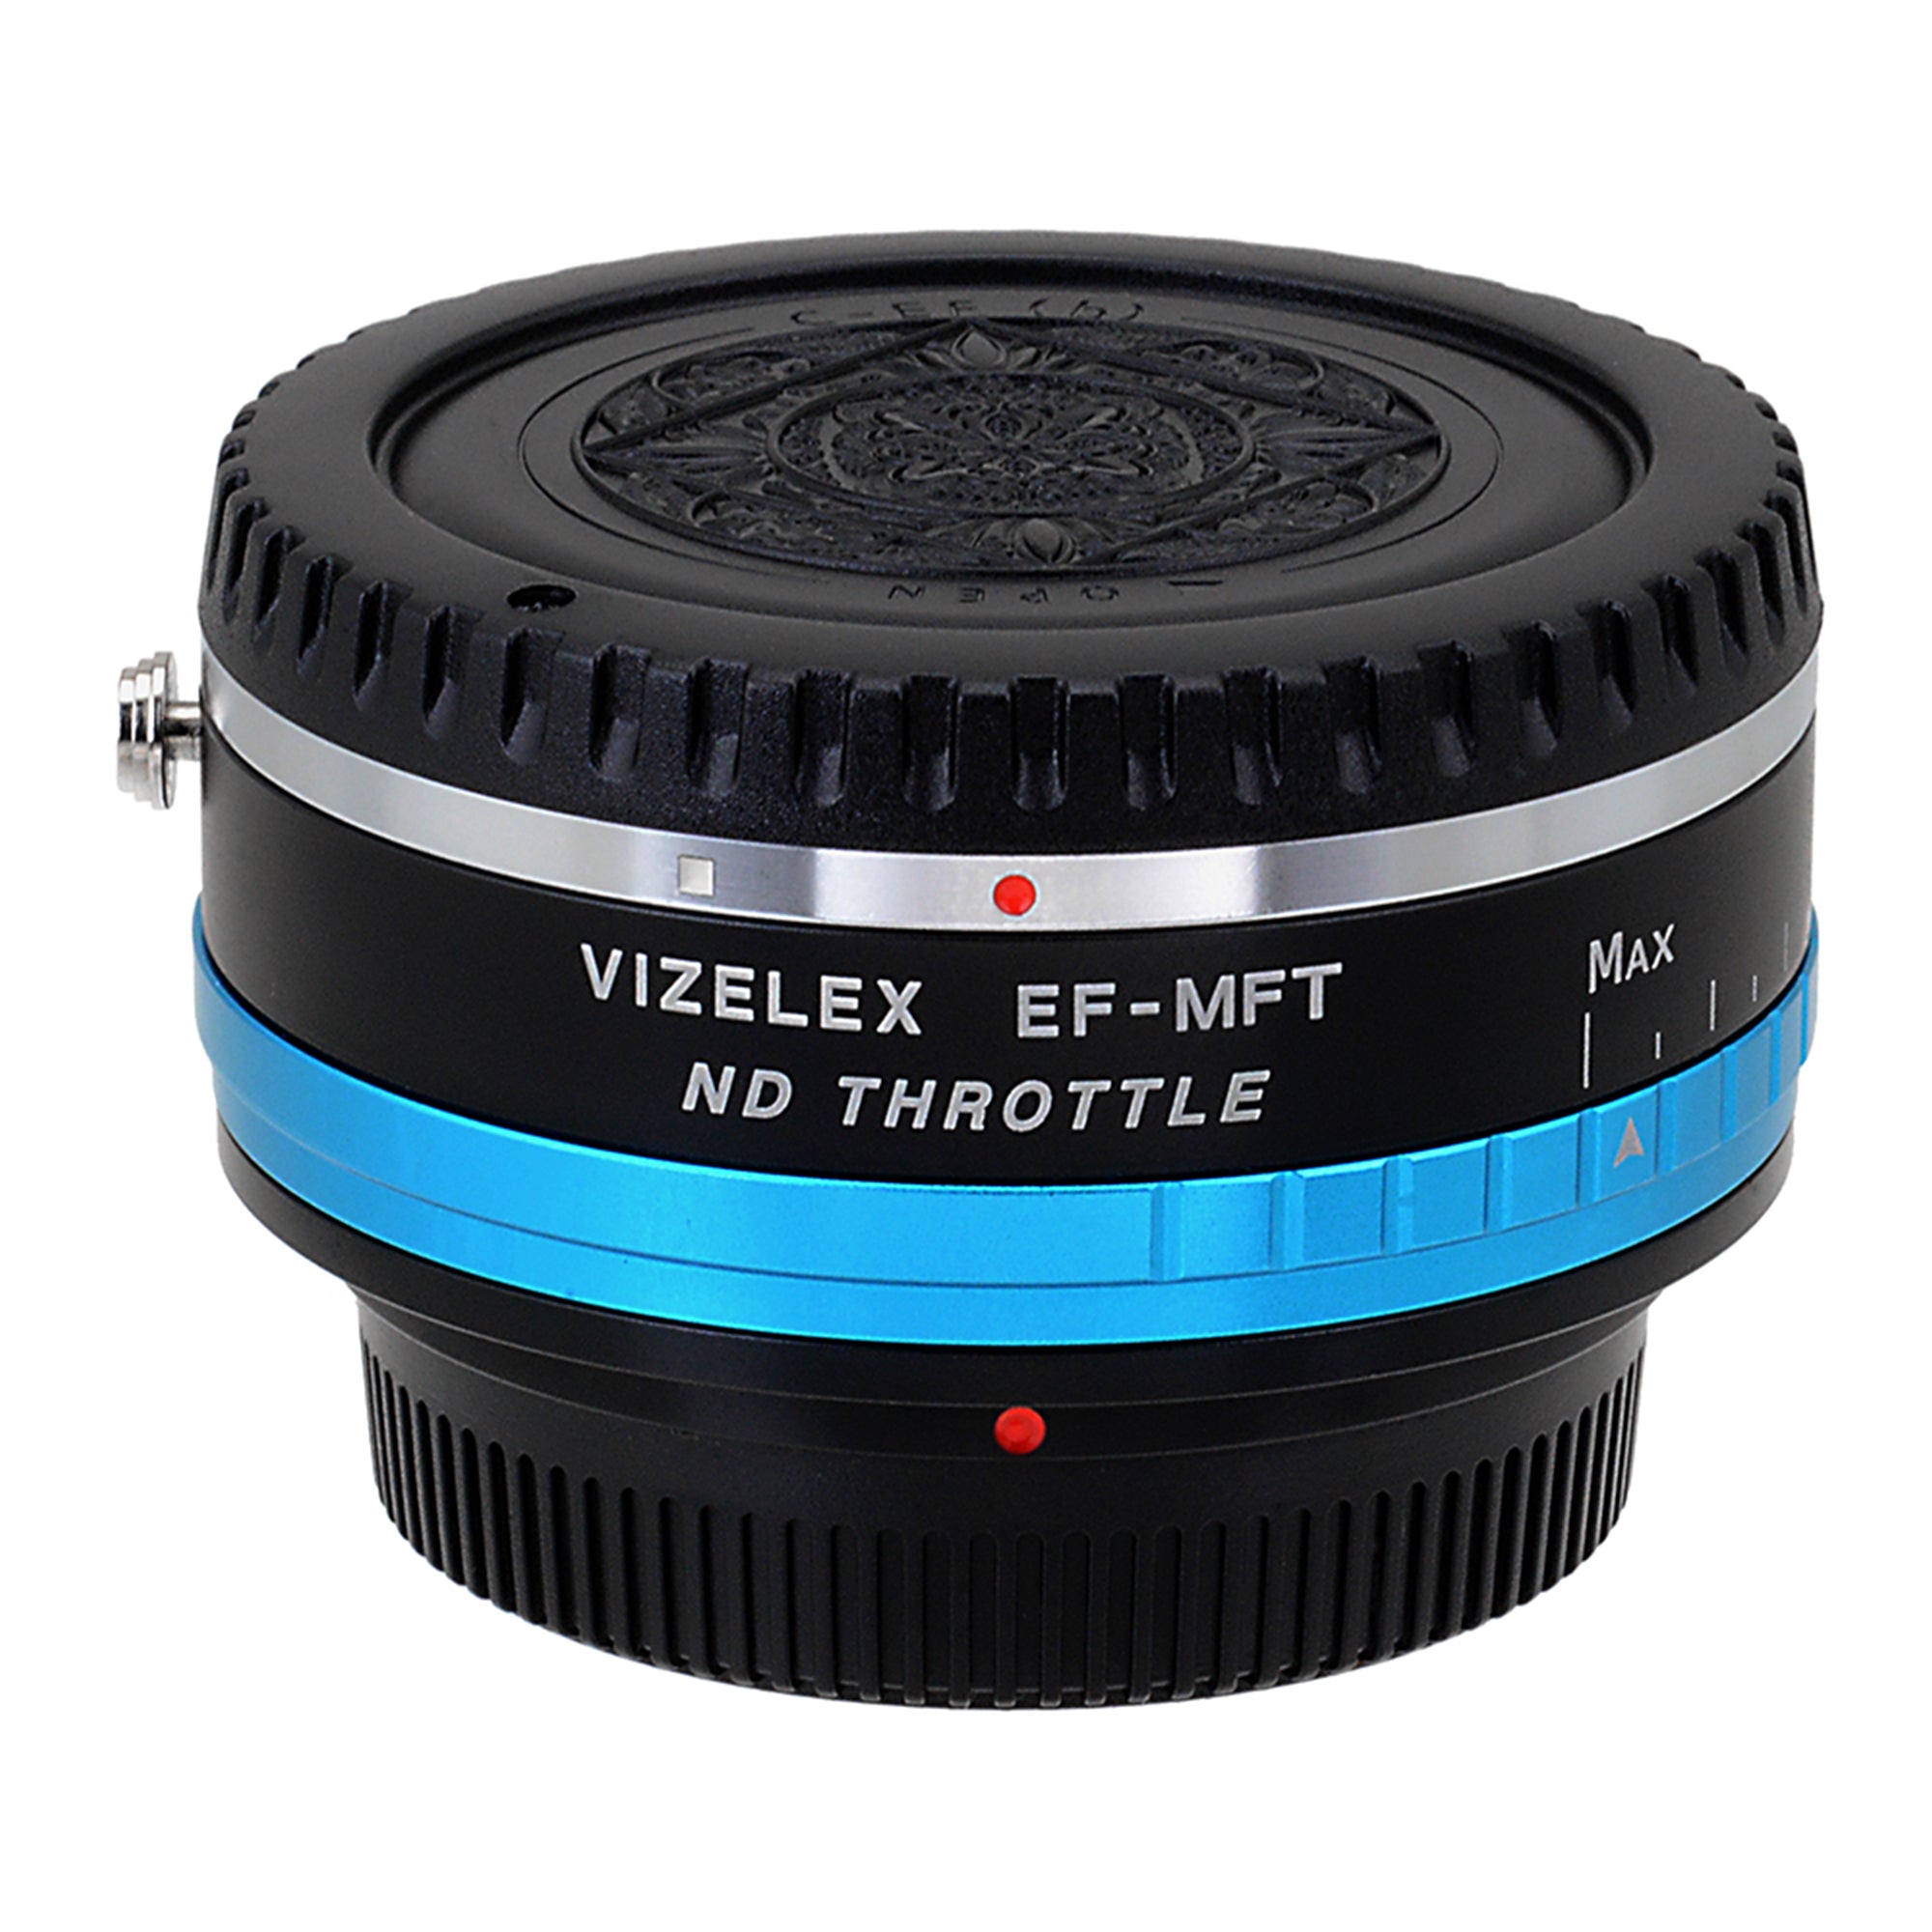 Vizelex ND Throttle Lens Mount Adapter - Olympus Zuiko (OM) 35mm SLR Lens to Micro Four Thirds (MFT, M4/3) Mount Mirrorless Camera Body, with Built-In Variable ND Filter (2 to 8 Stops)